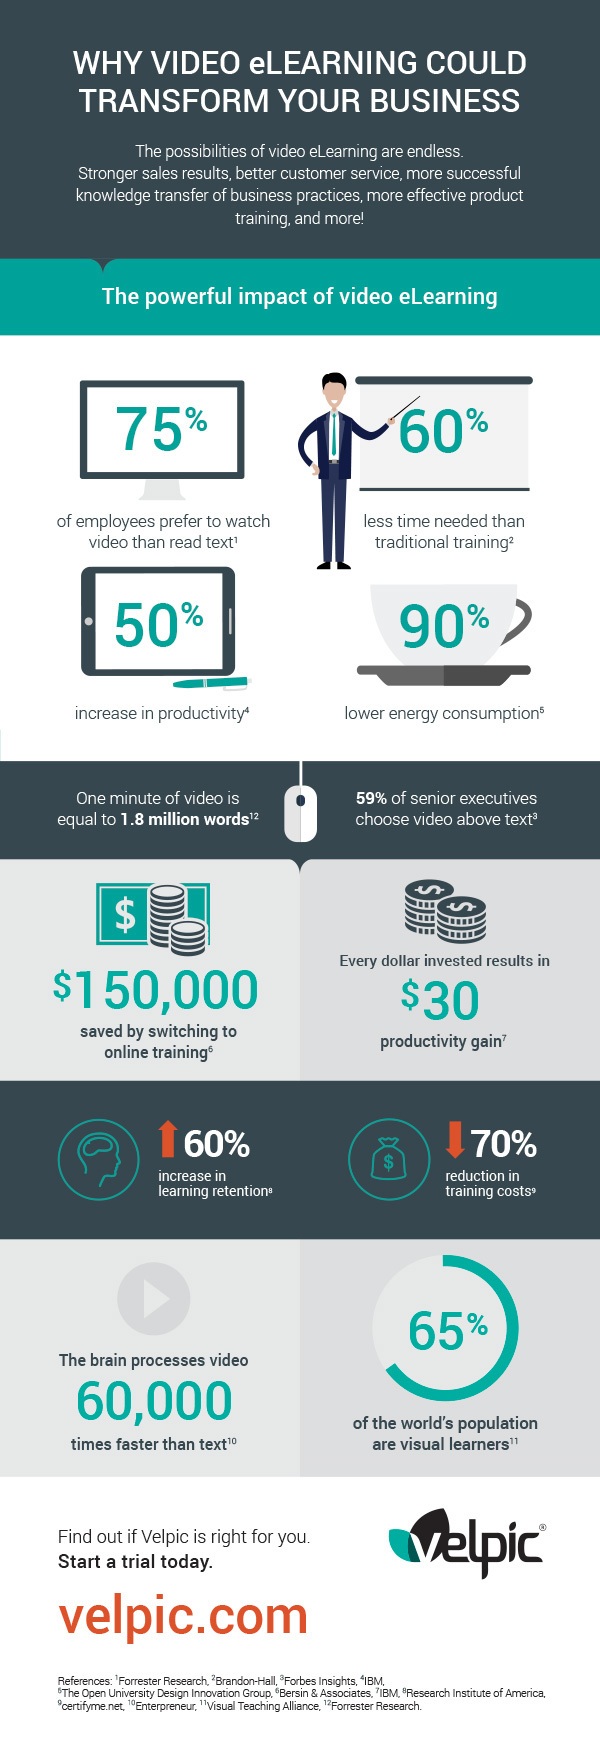 Why Video eLearning Could Transform Your Business Infographic